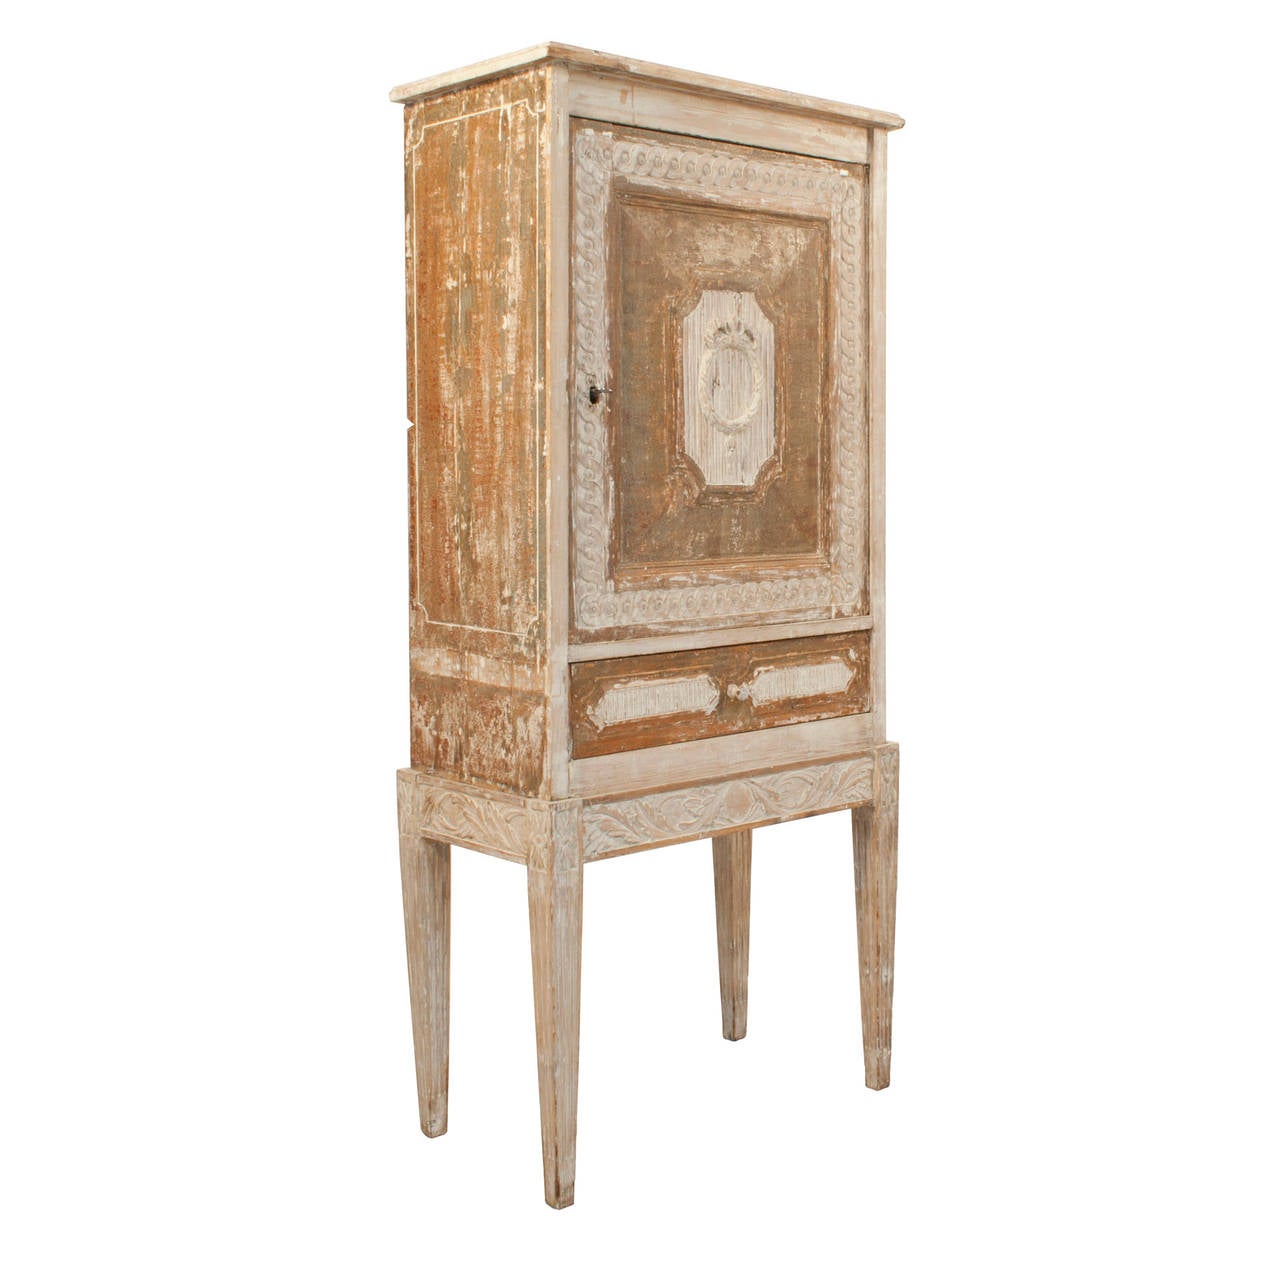 Small Gustavian cabinet with a door and a drawer in a worn patina of green, grey and salmon.